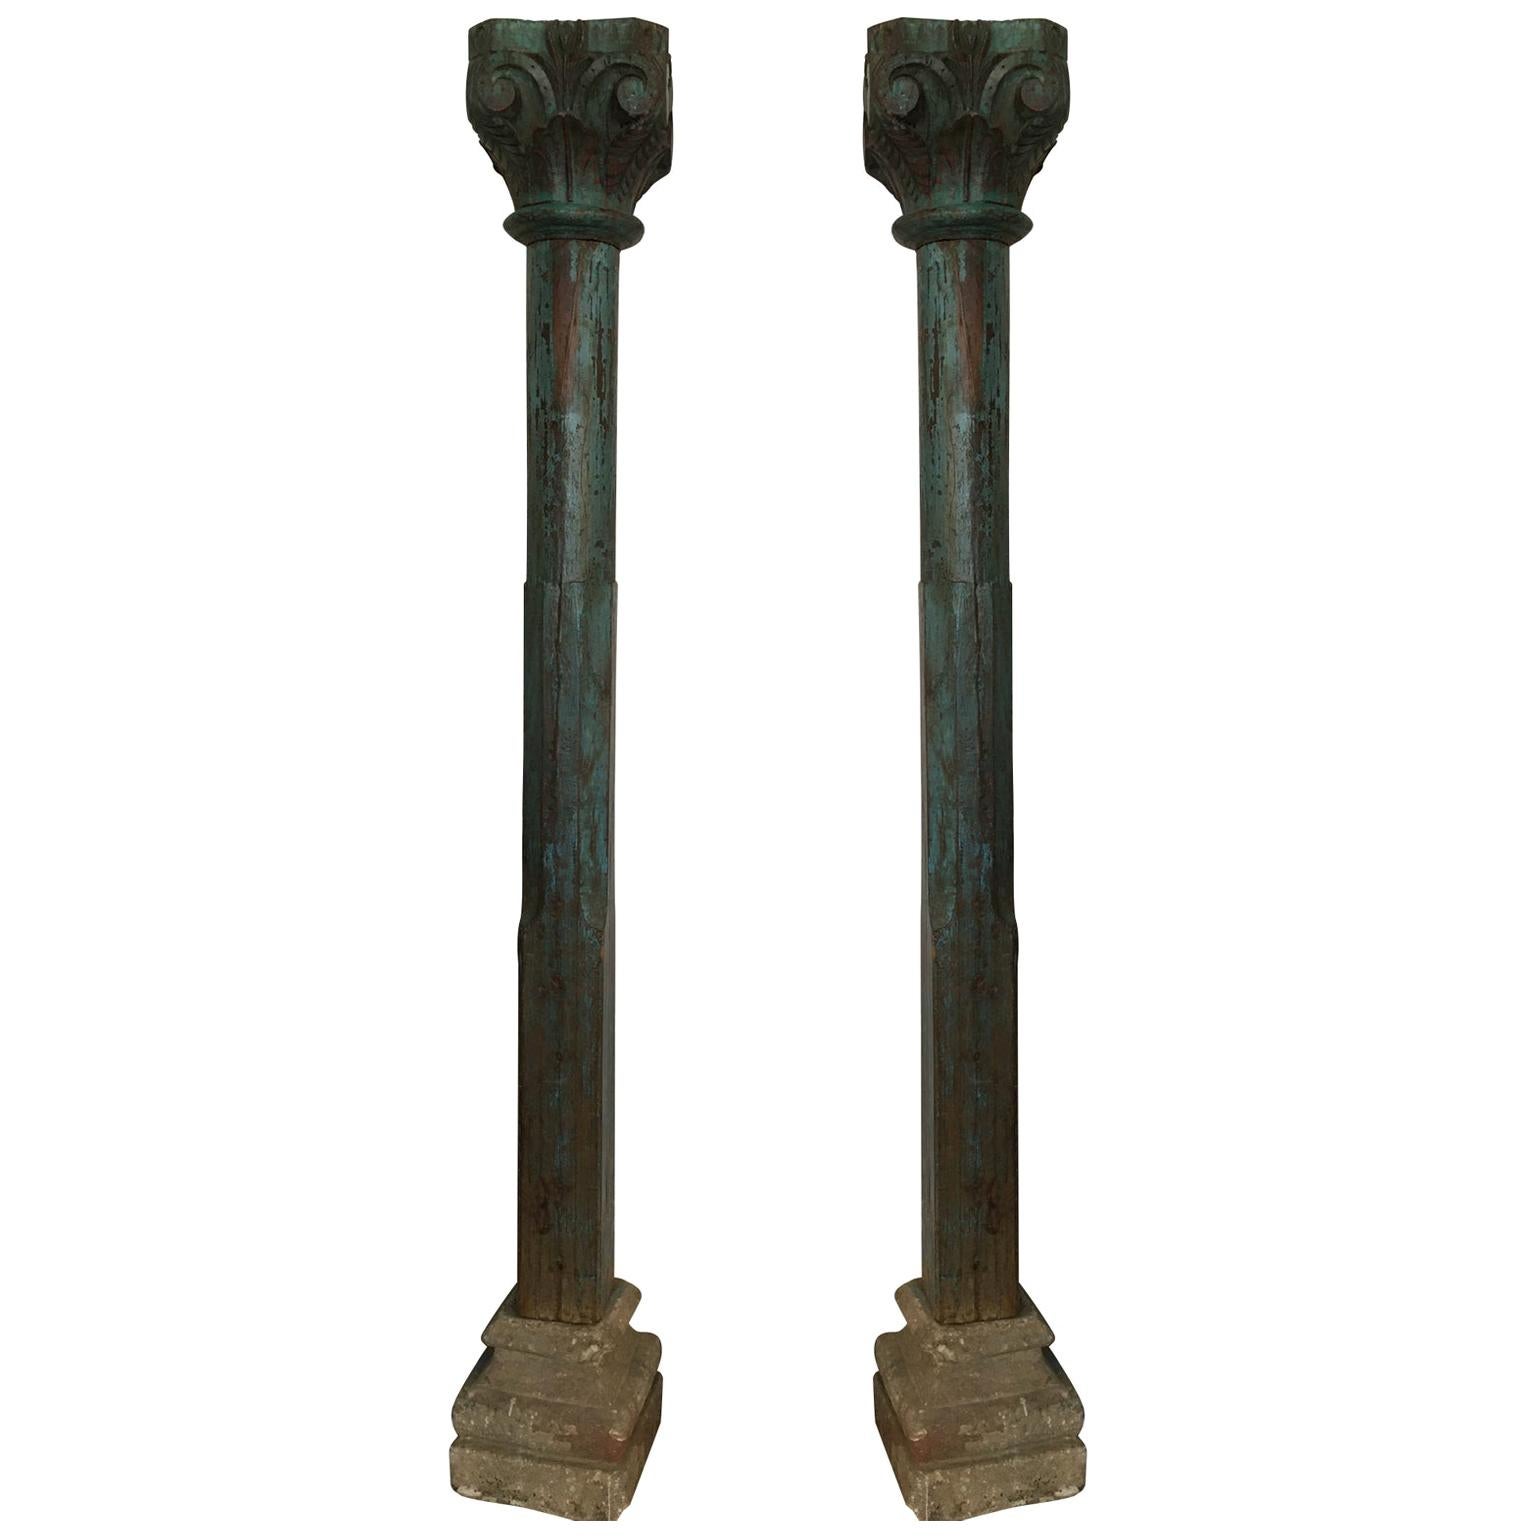 Pair of Solid Teak Columns on Stone Bases with Original Paint, Late 19th Century